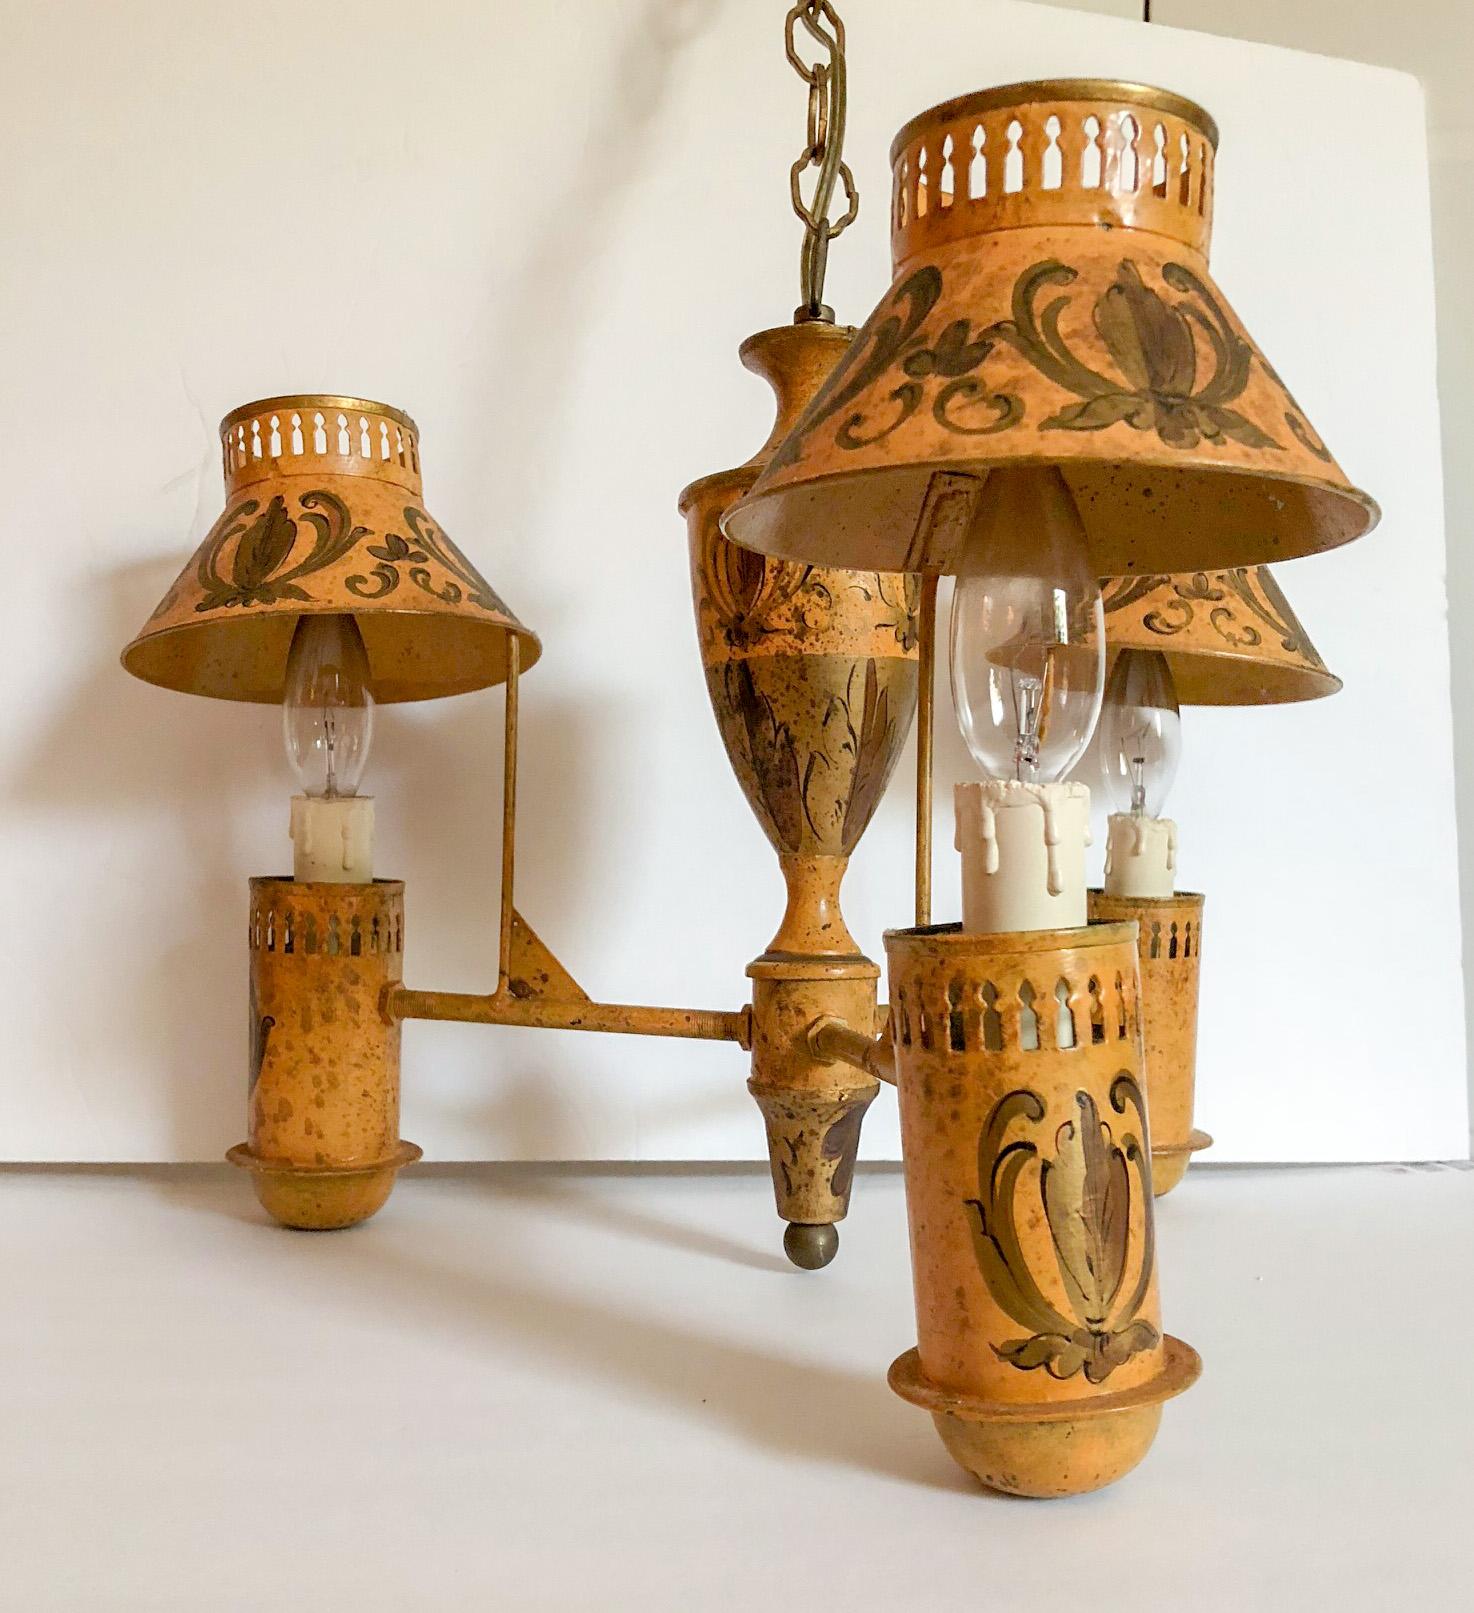 A wonderful tole painted mustard yellow French chandelier with three arms and bouillotte pierced shades. Chandelier appears to have been candle lit at one time and is decorated with hand painted gold ornamentation. While not original, the gold